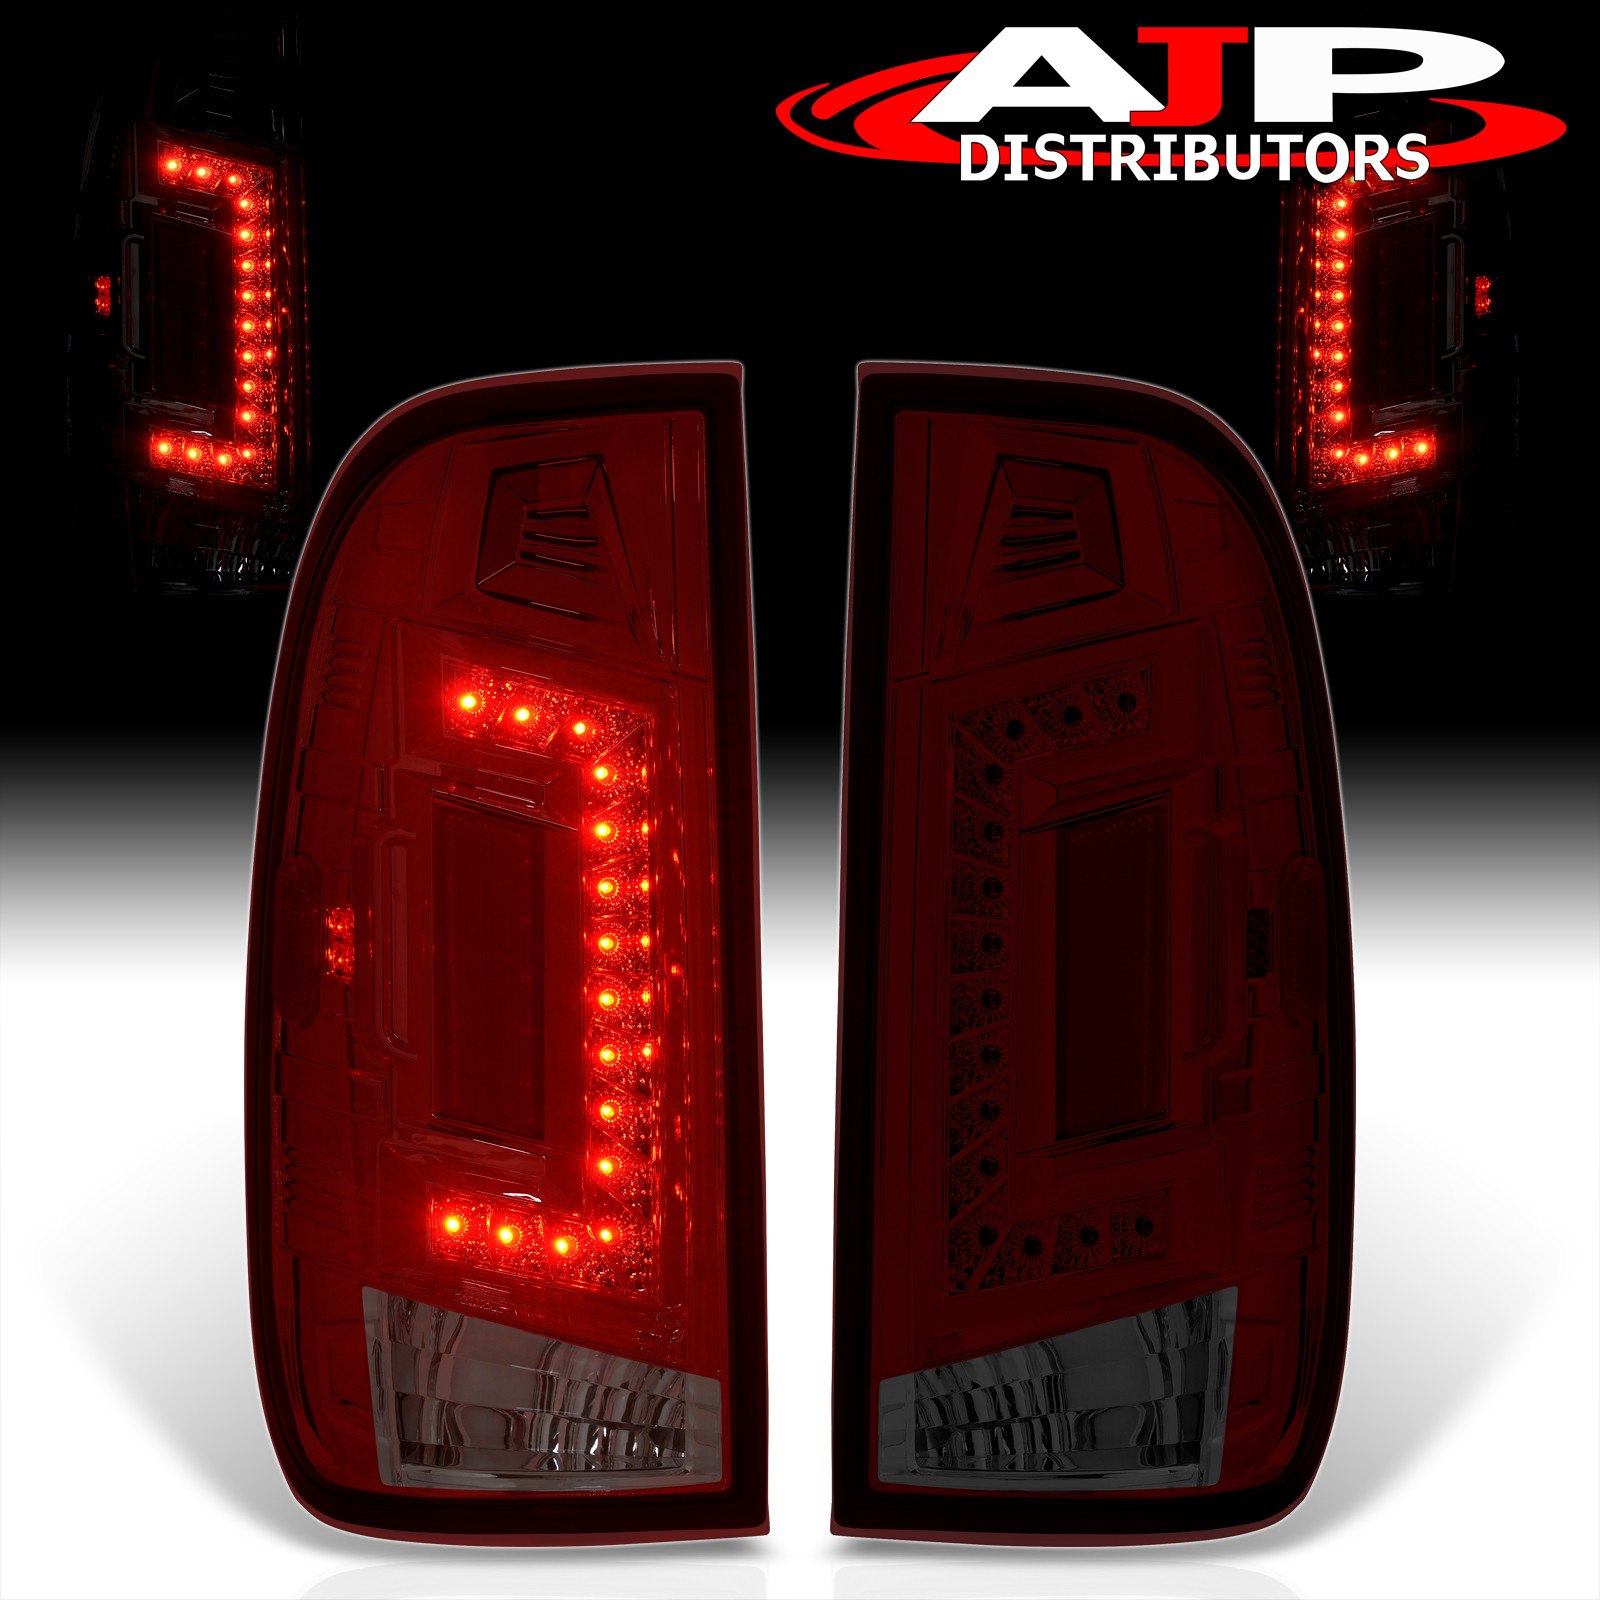 Red Smoked LED Replacement Brake Tail Lights For 1997-2003 Ford F150 StyleSide | eBay 2003 Ford F150 Brake Lights Not Working